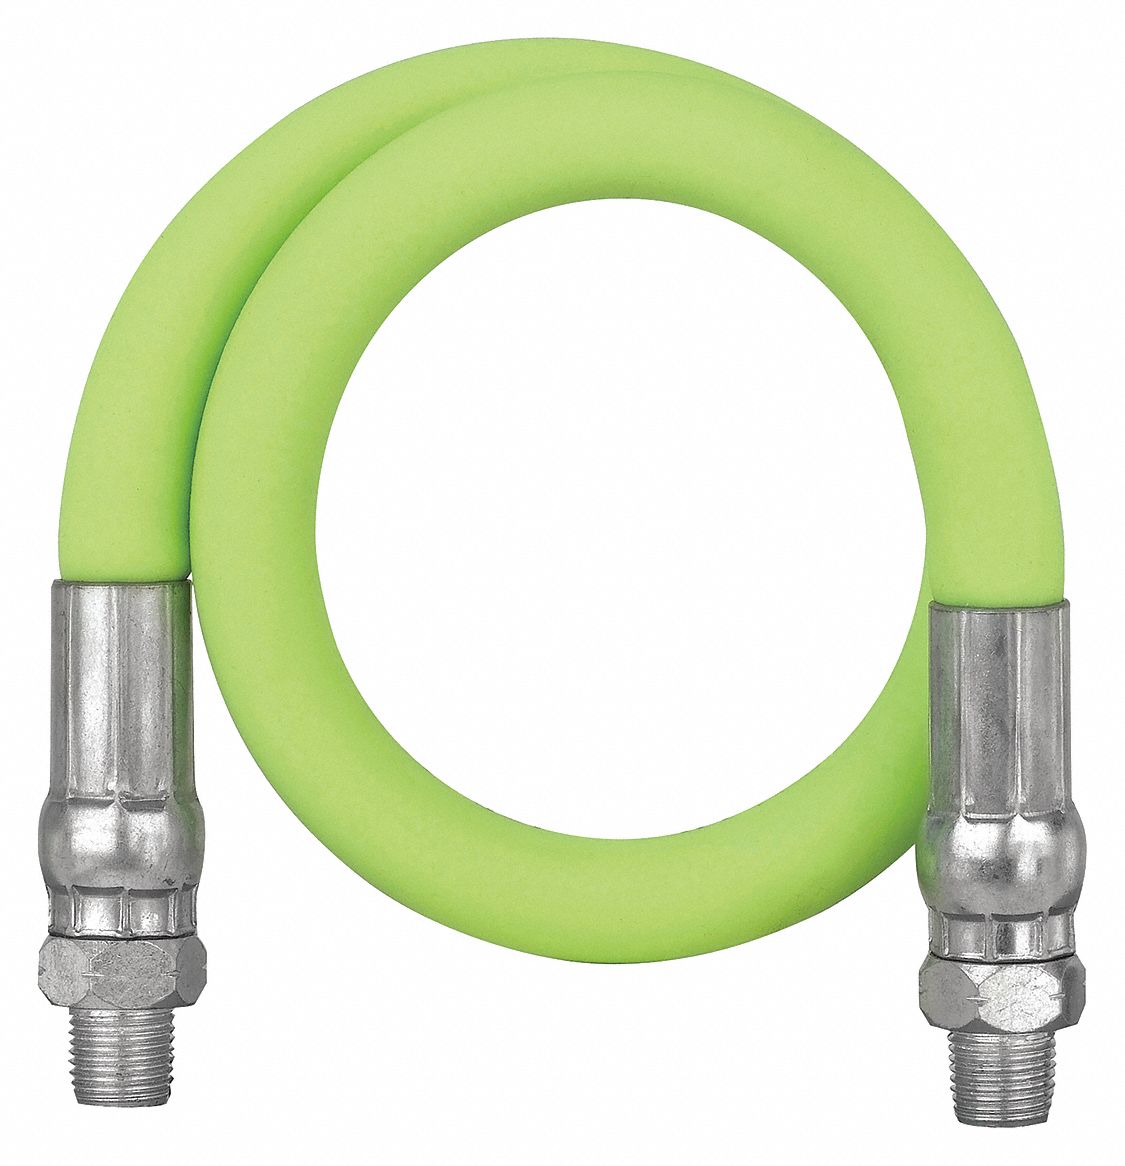 Grease Gun Hose: 18 in L, For Use With Manual or Battery Operated Grease Guns